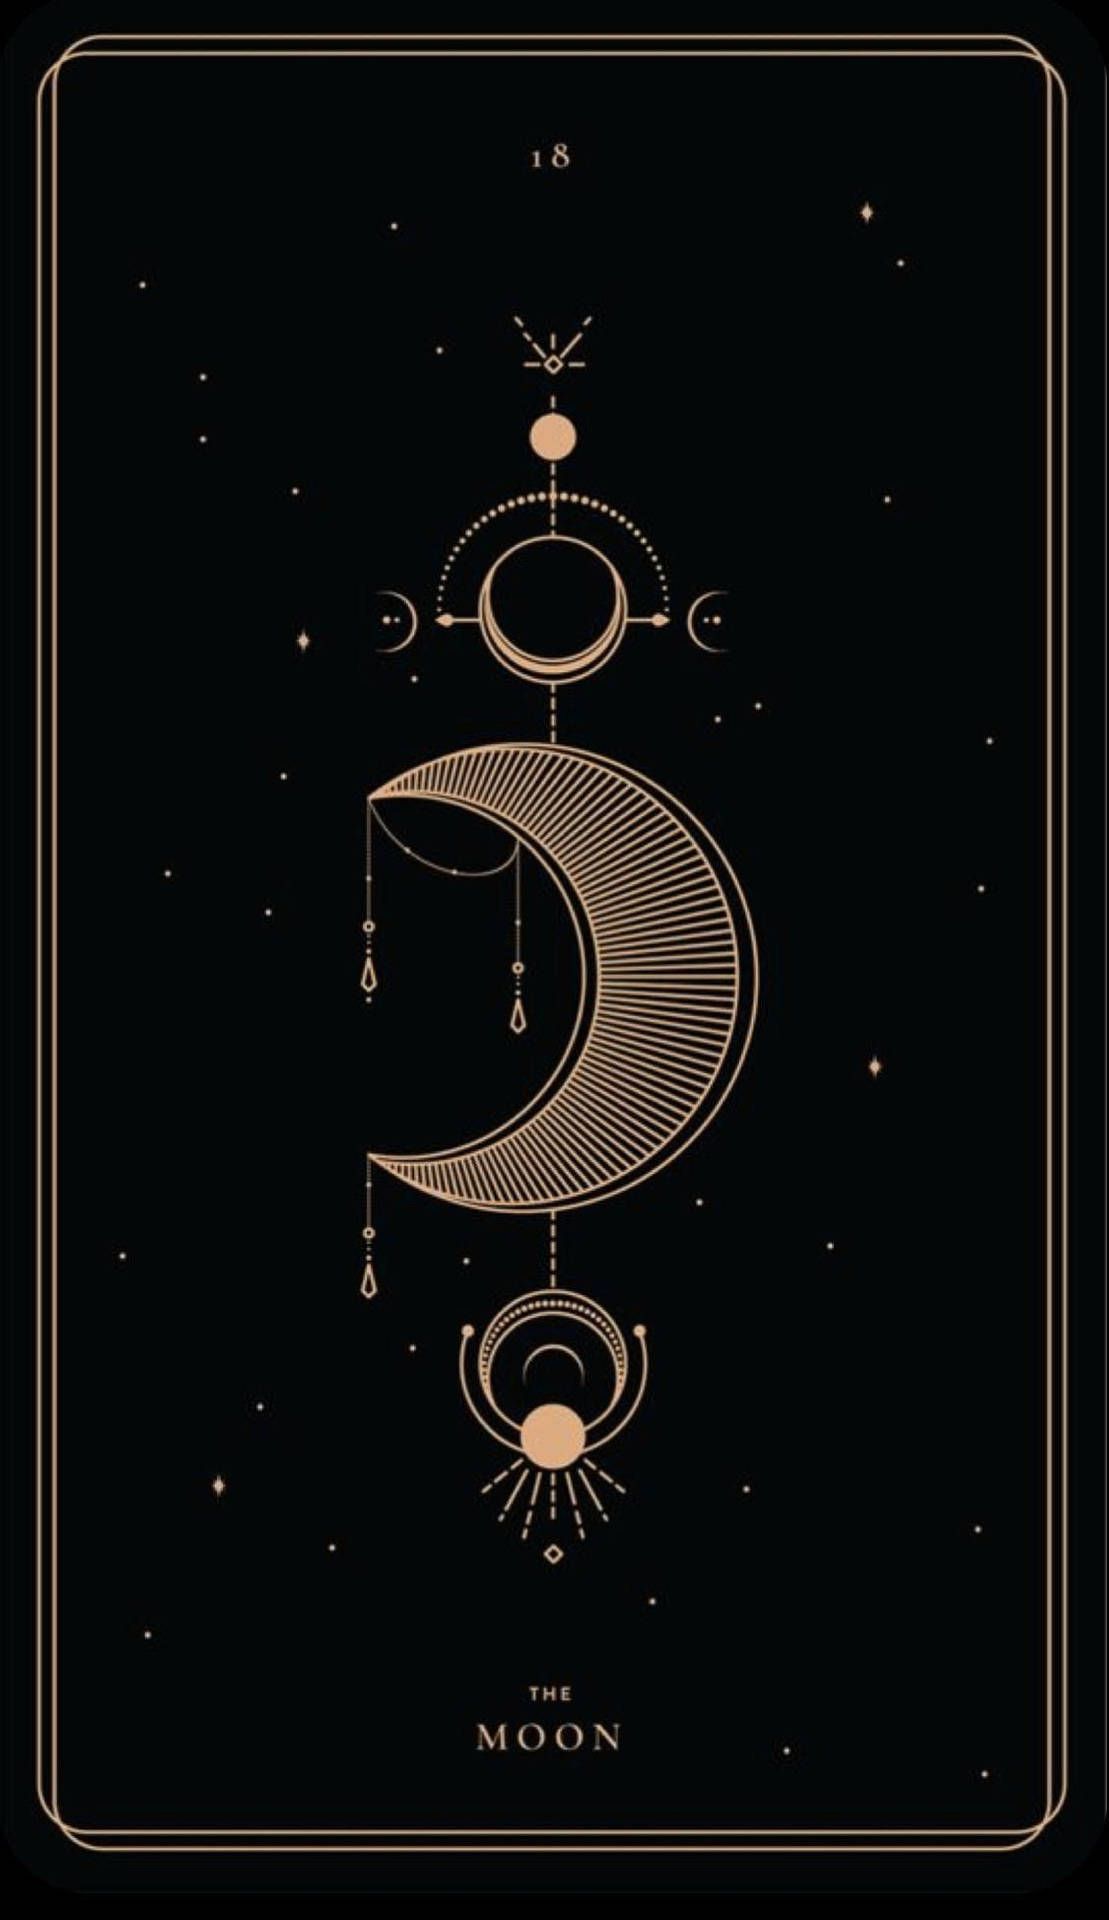 A tarot card showing a crescent moon with phases. - Spiritual